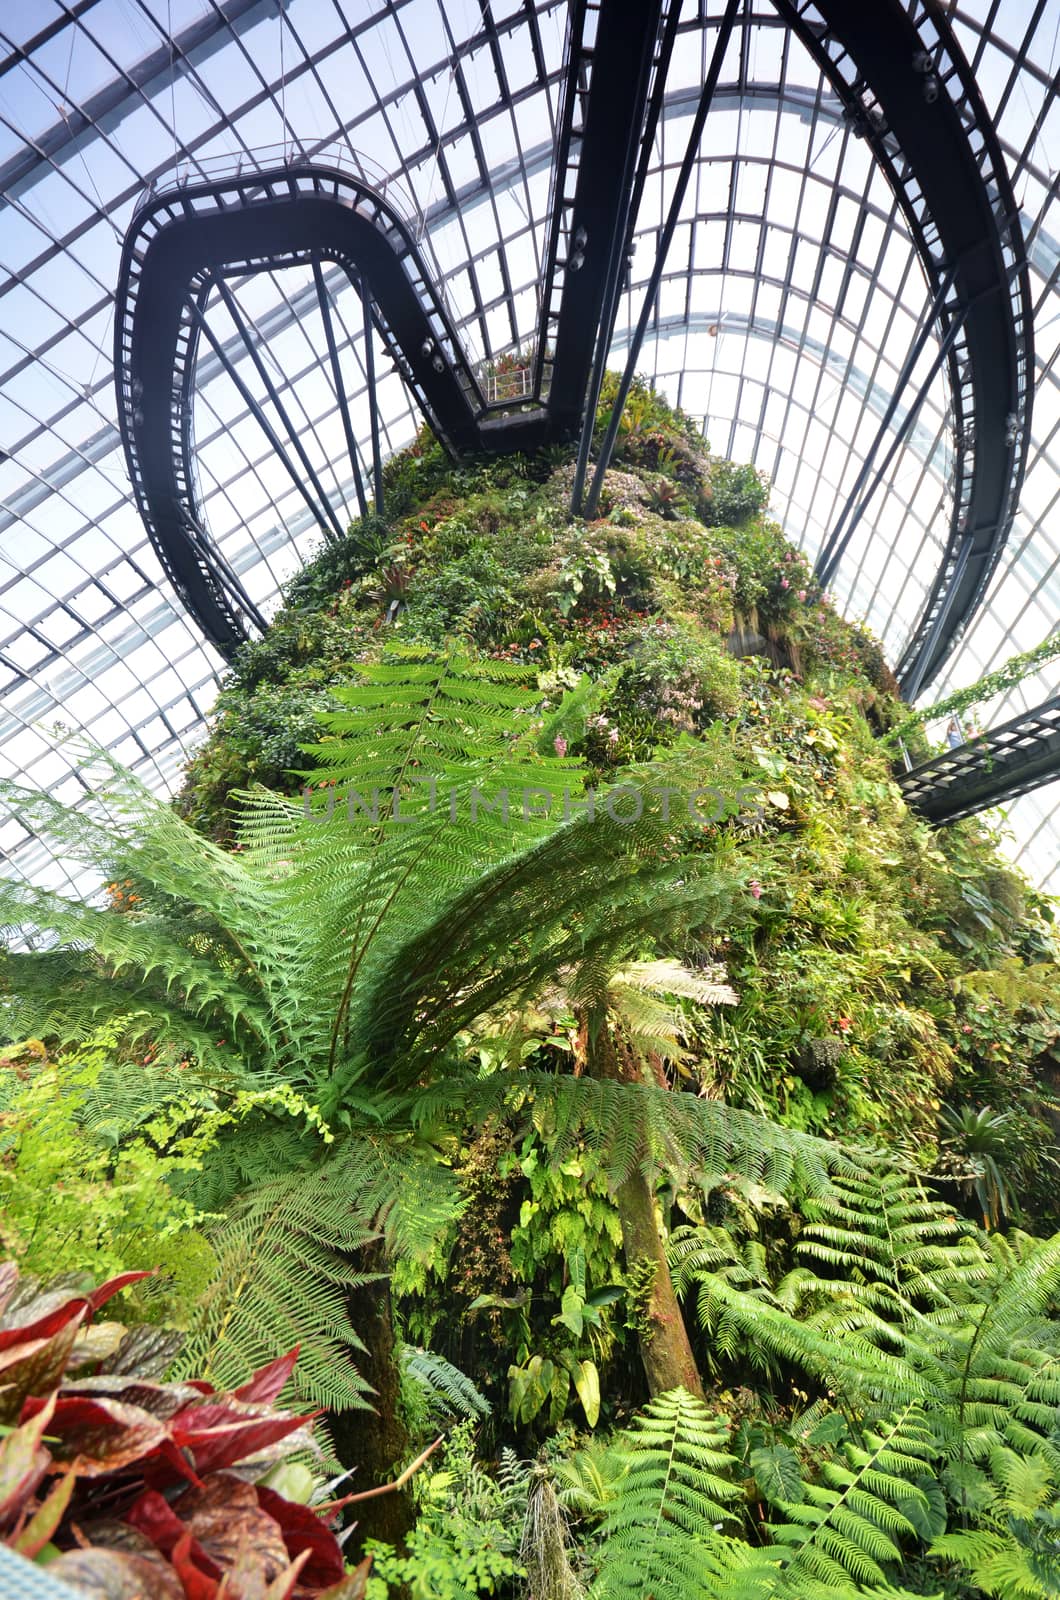 SINGAPORE- SEP 5: View of Cloud Forest at Gardens by the Bay on September 5, 2015. in Singapore. Gardens by the Bay is a park spanning 101 hectares of reclaimed land.